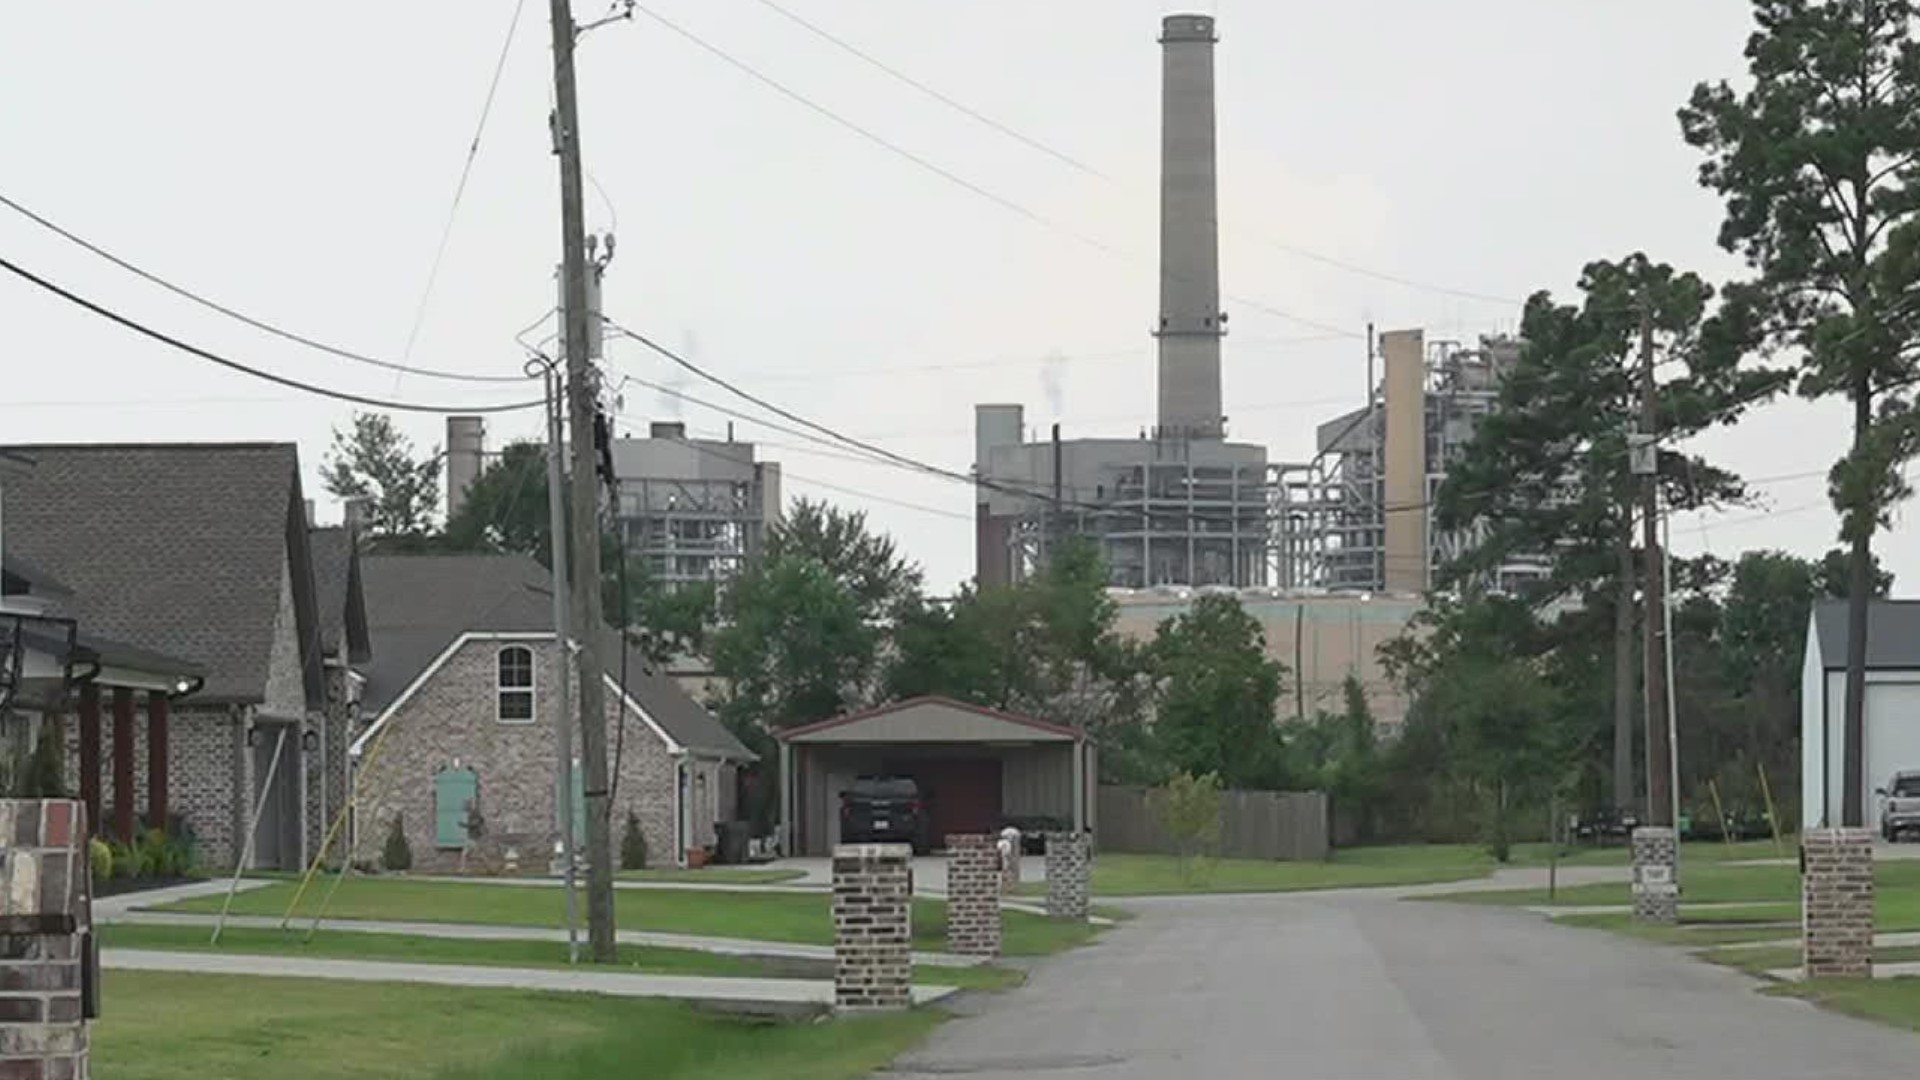 Entergy is moving forward with plans to build a new and improved power station in Orange County.